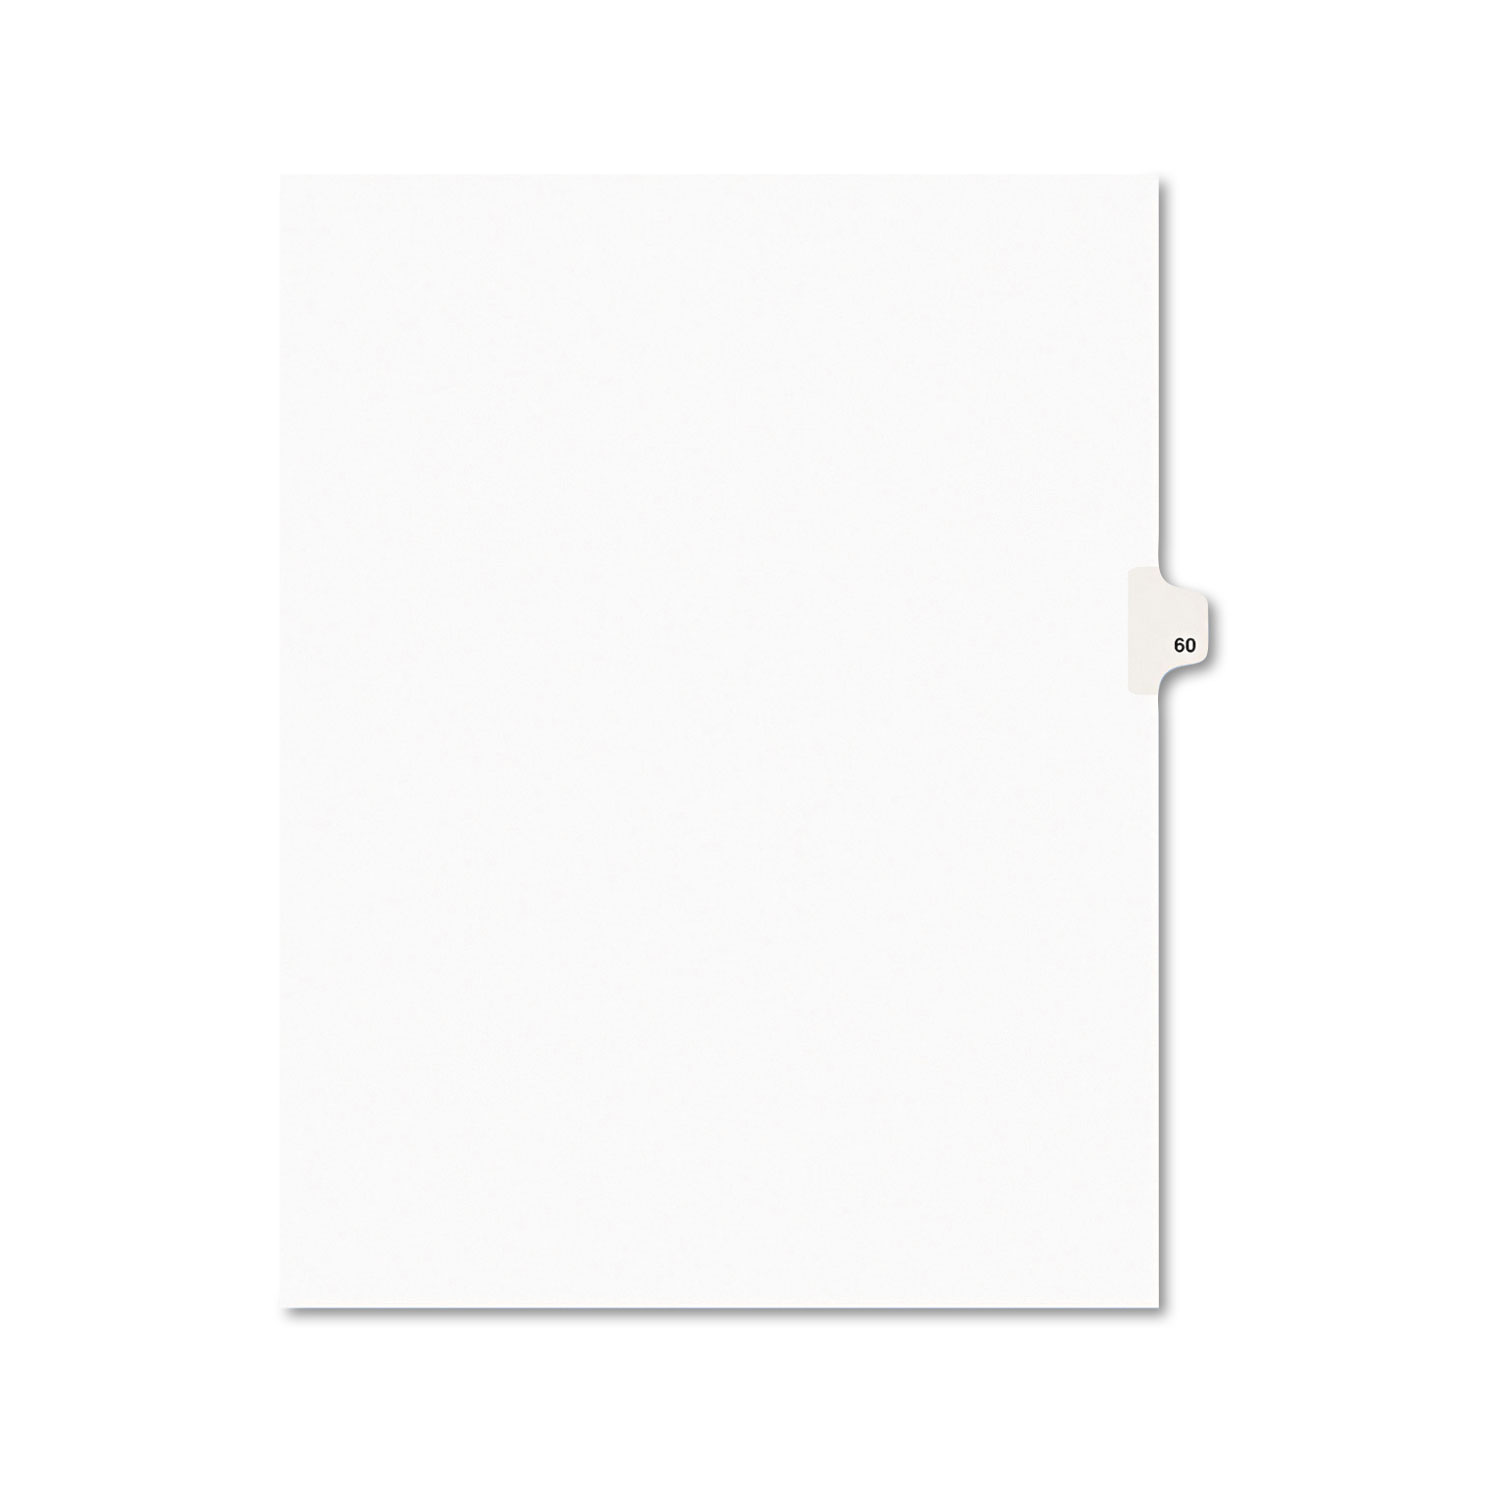  Avery 01060 Preprinted Legal Exhibit Side Tab Index Dividers, Avery Style, 10-Tab, 60, 11 x 8.5, White, 25/Pack (AVE01060) 